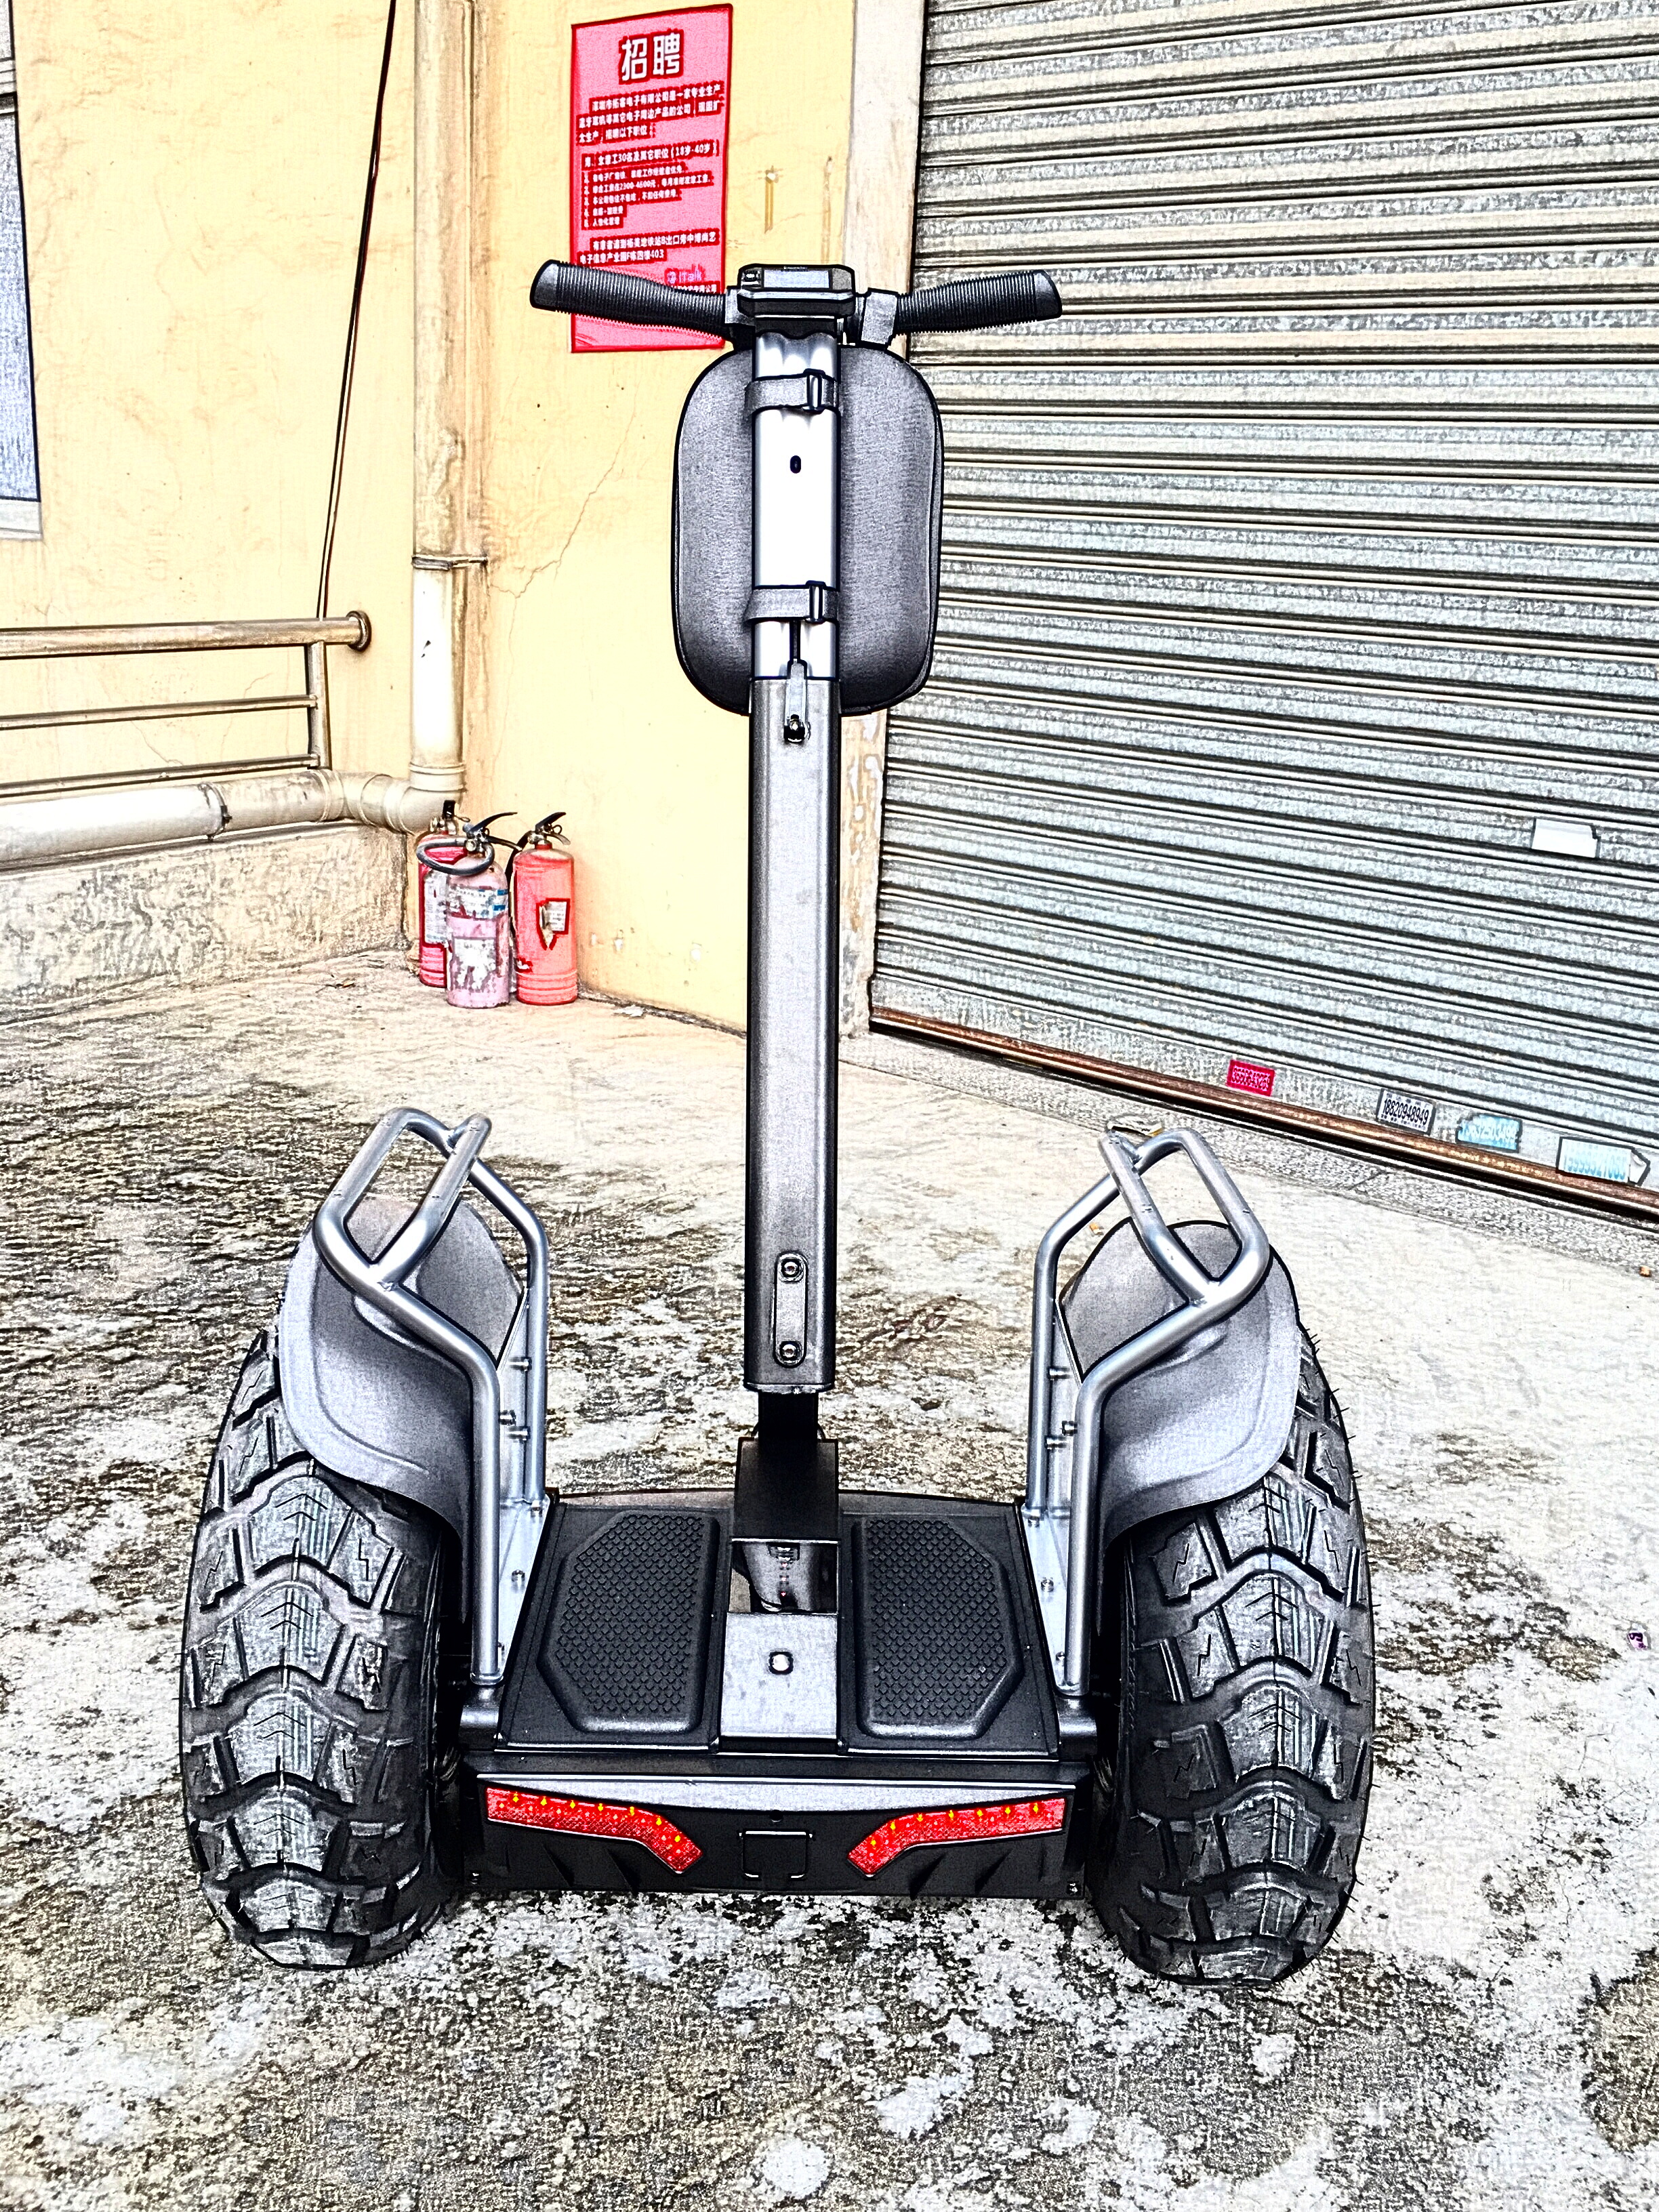 EcoRider Electric Chariot Scooter E8 x2, 2 Wheel Self Balancing Electric Scooter Price with Double Battery